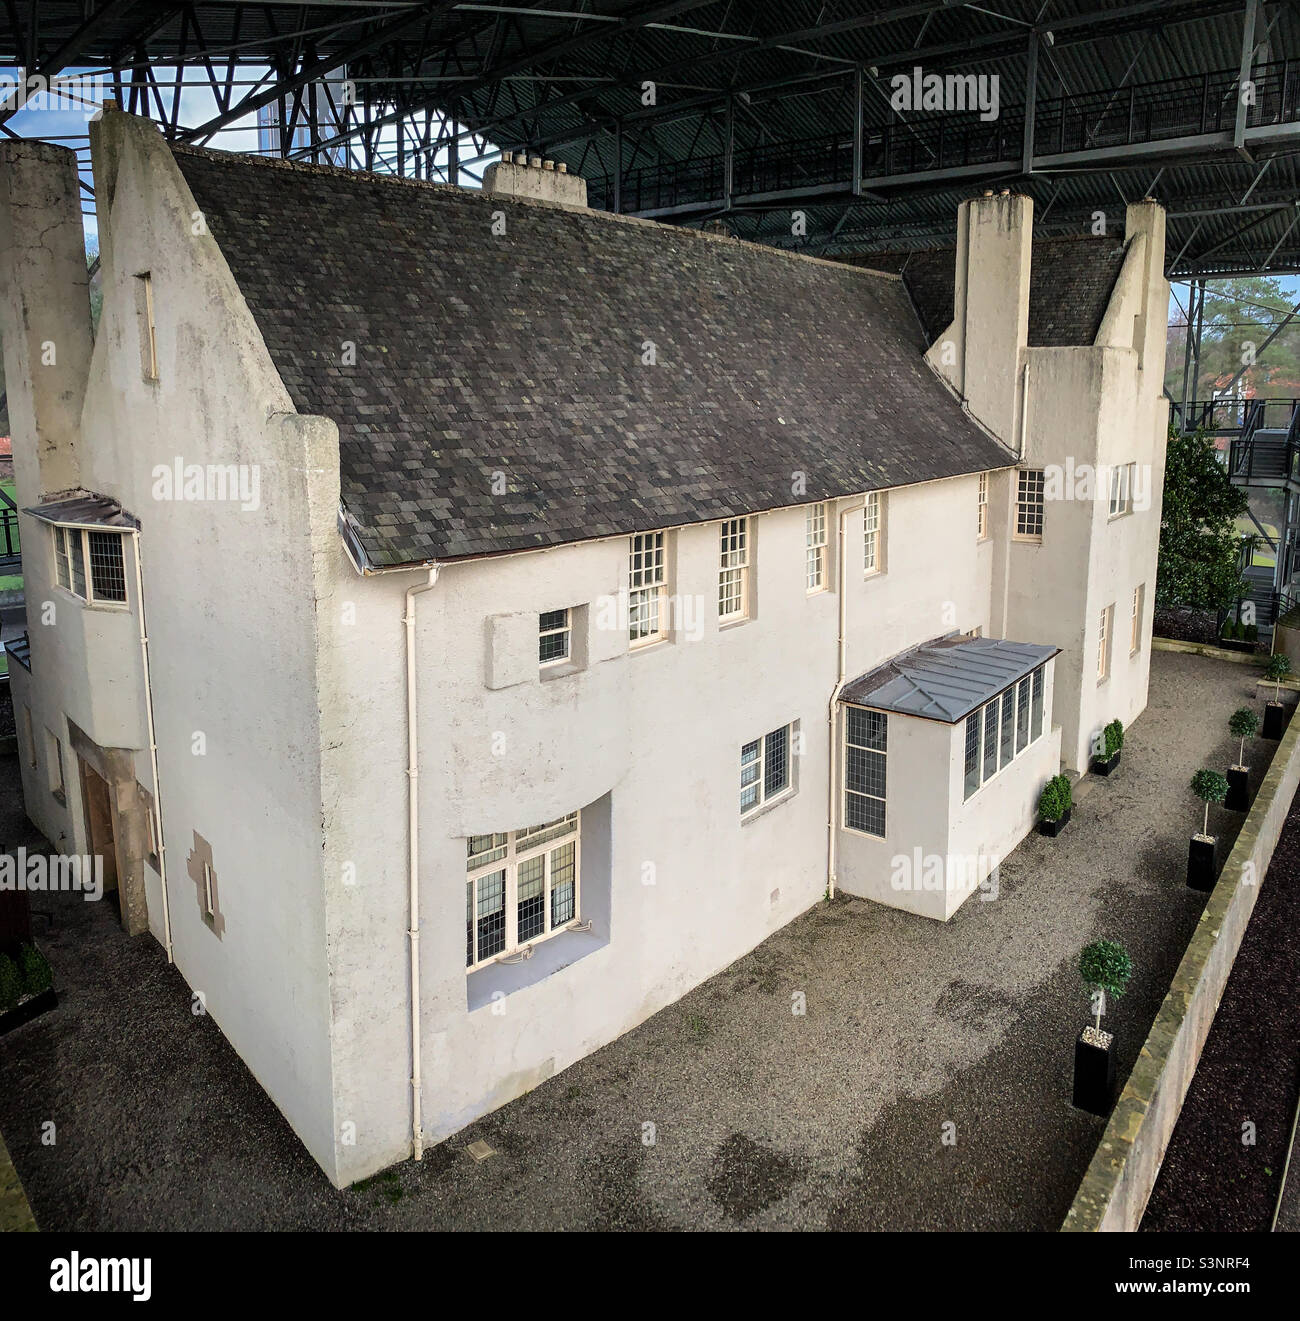 The Hill House in Helensburgh, designed by Charles Rennie Mackintosh and Margaret Macdonald Mackintosh in the ‘Glasgow style’. It was built for Glasgow book publisher Walter Blackie and his family. Stock Photo